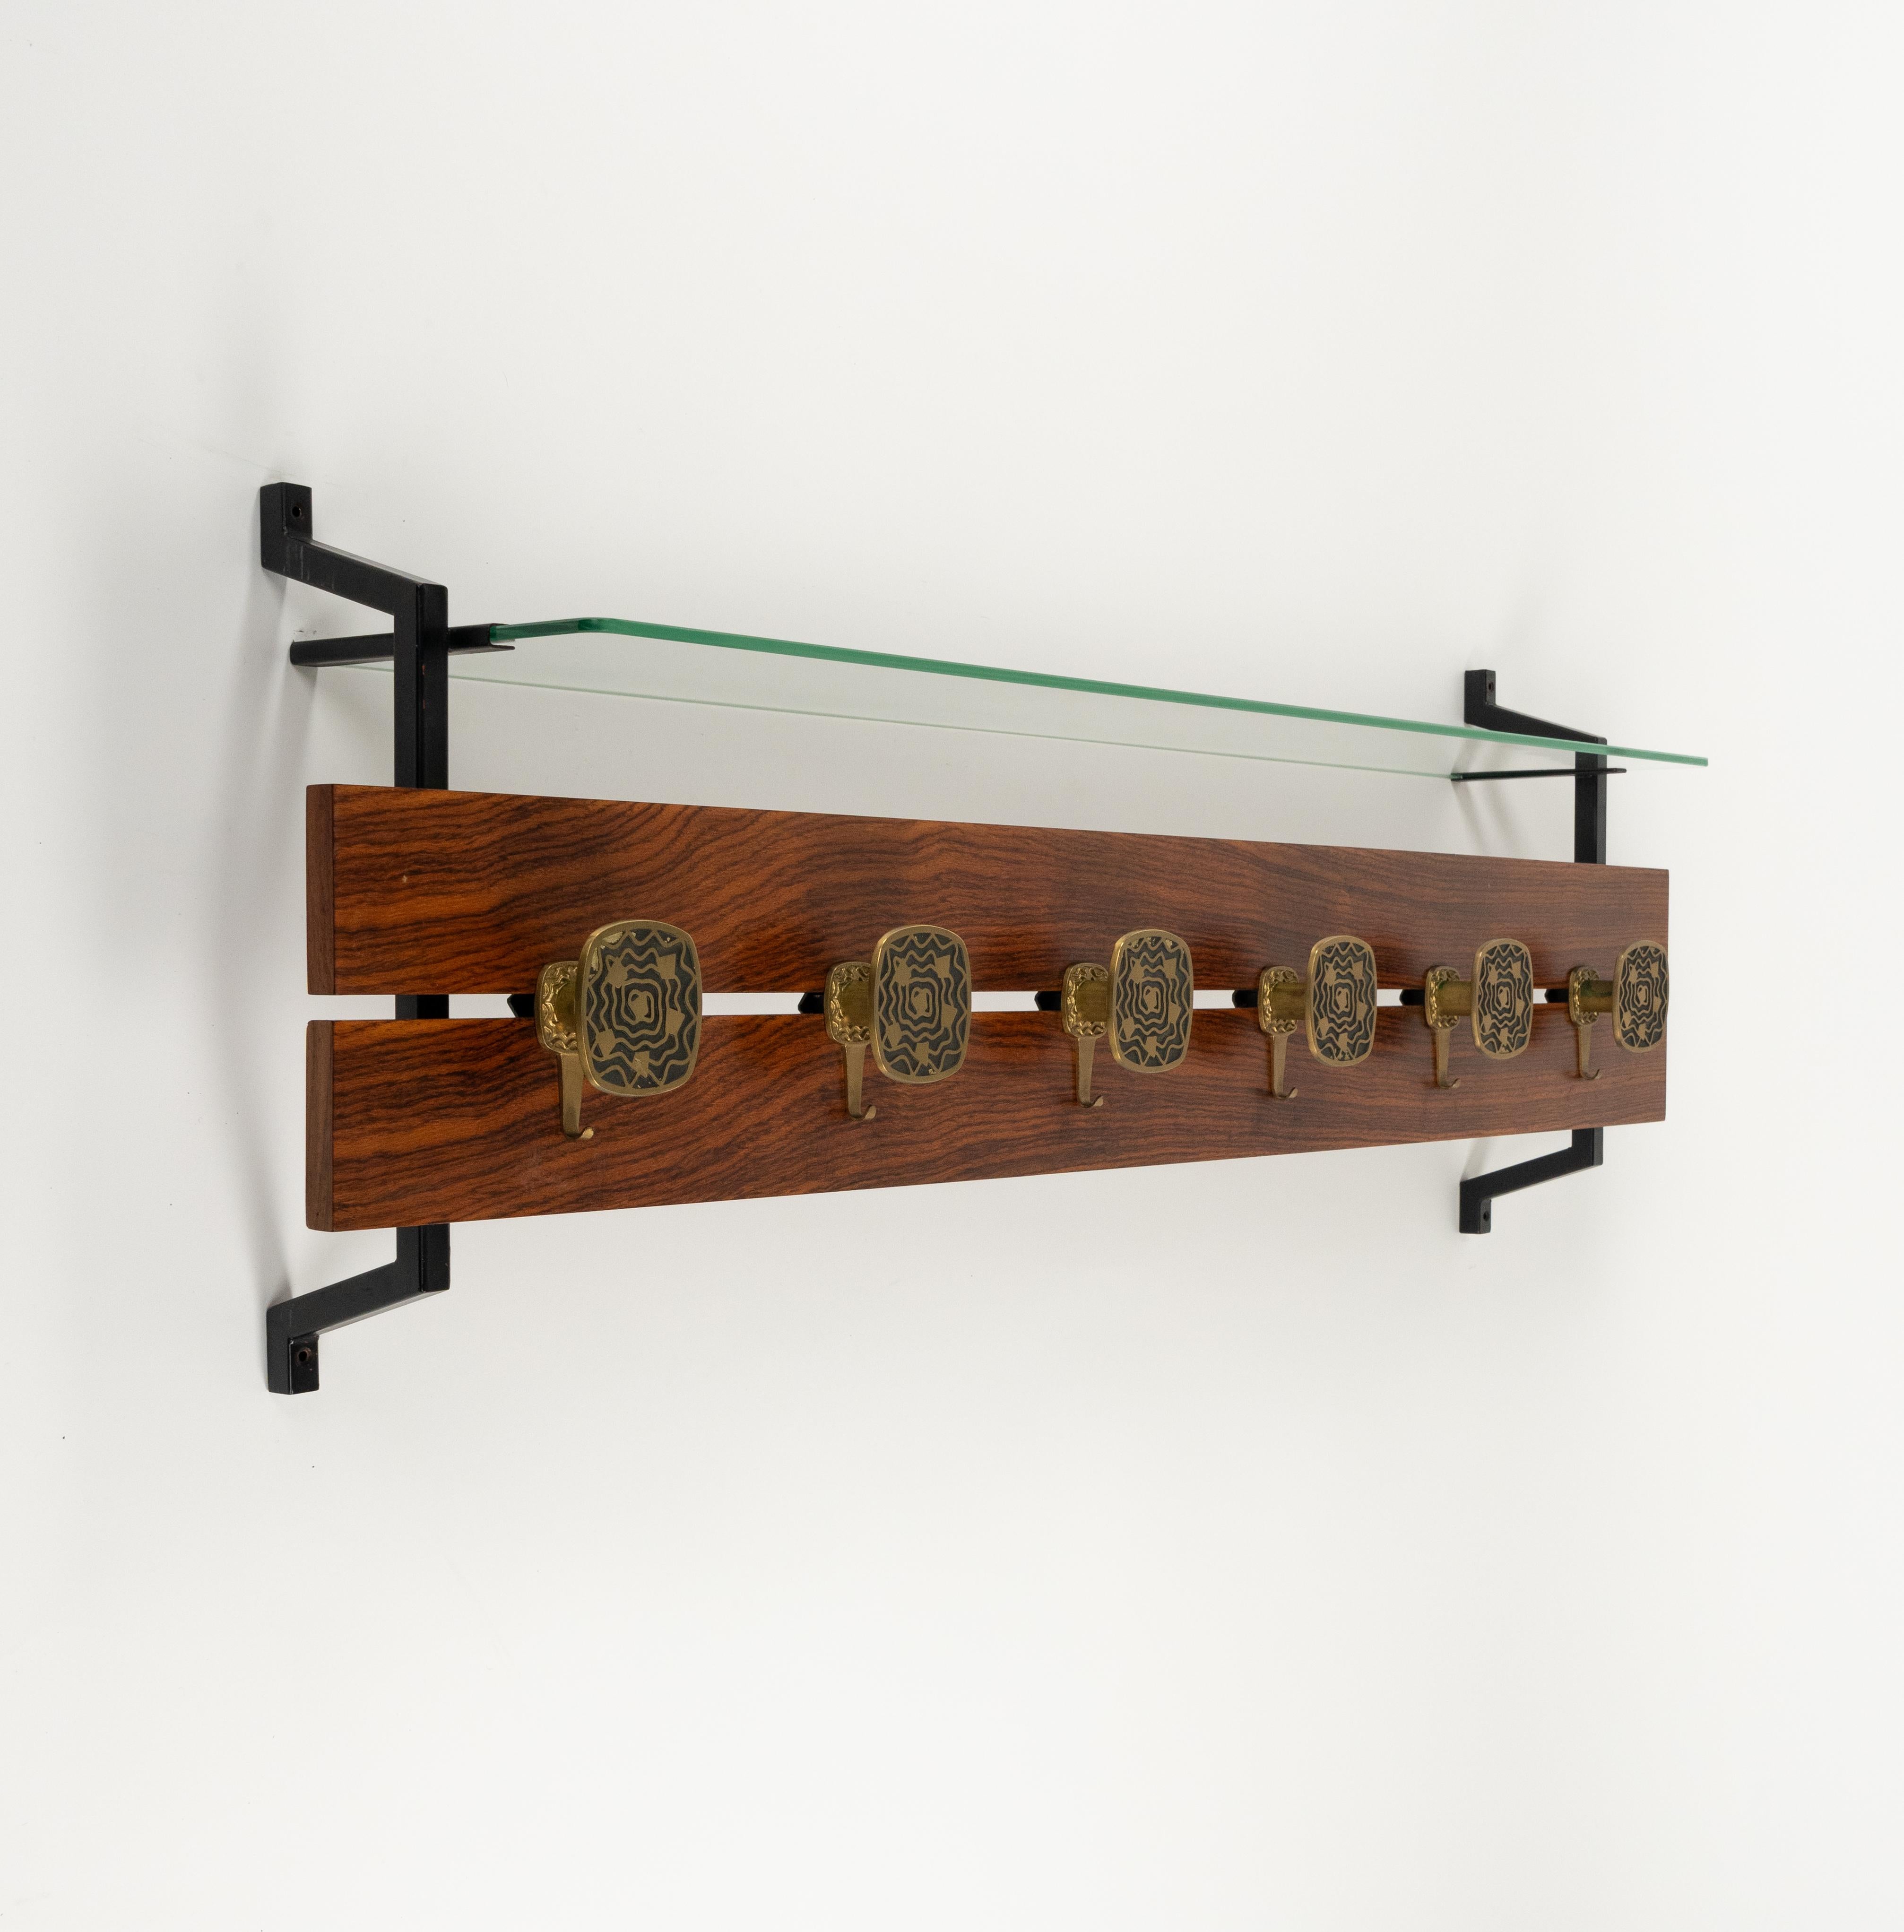 Midcentury amazing large wall coat rack in wood, glass top shelf and six hooks in brass  in the style of Walter Bosse and Herta Baller.

Made in Italy in the 1970s.